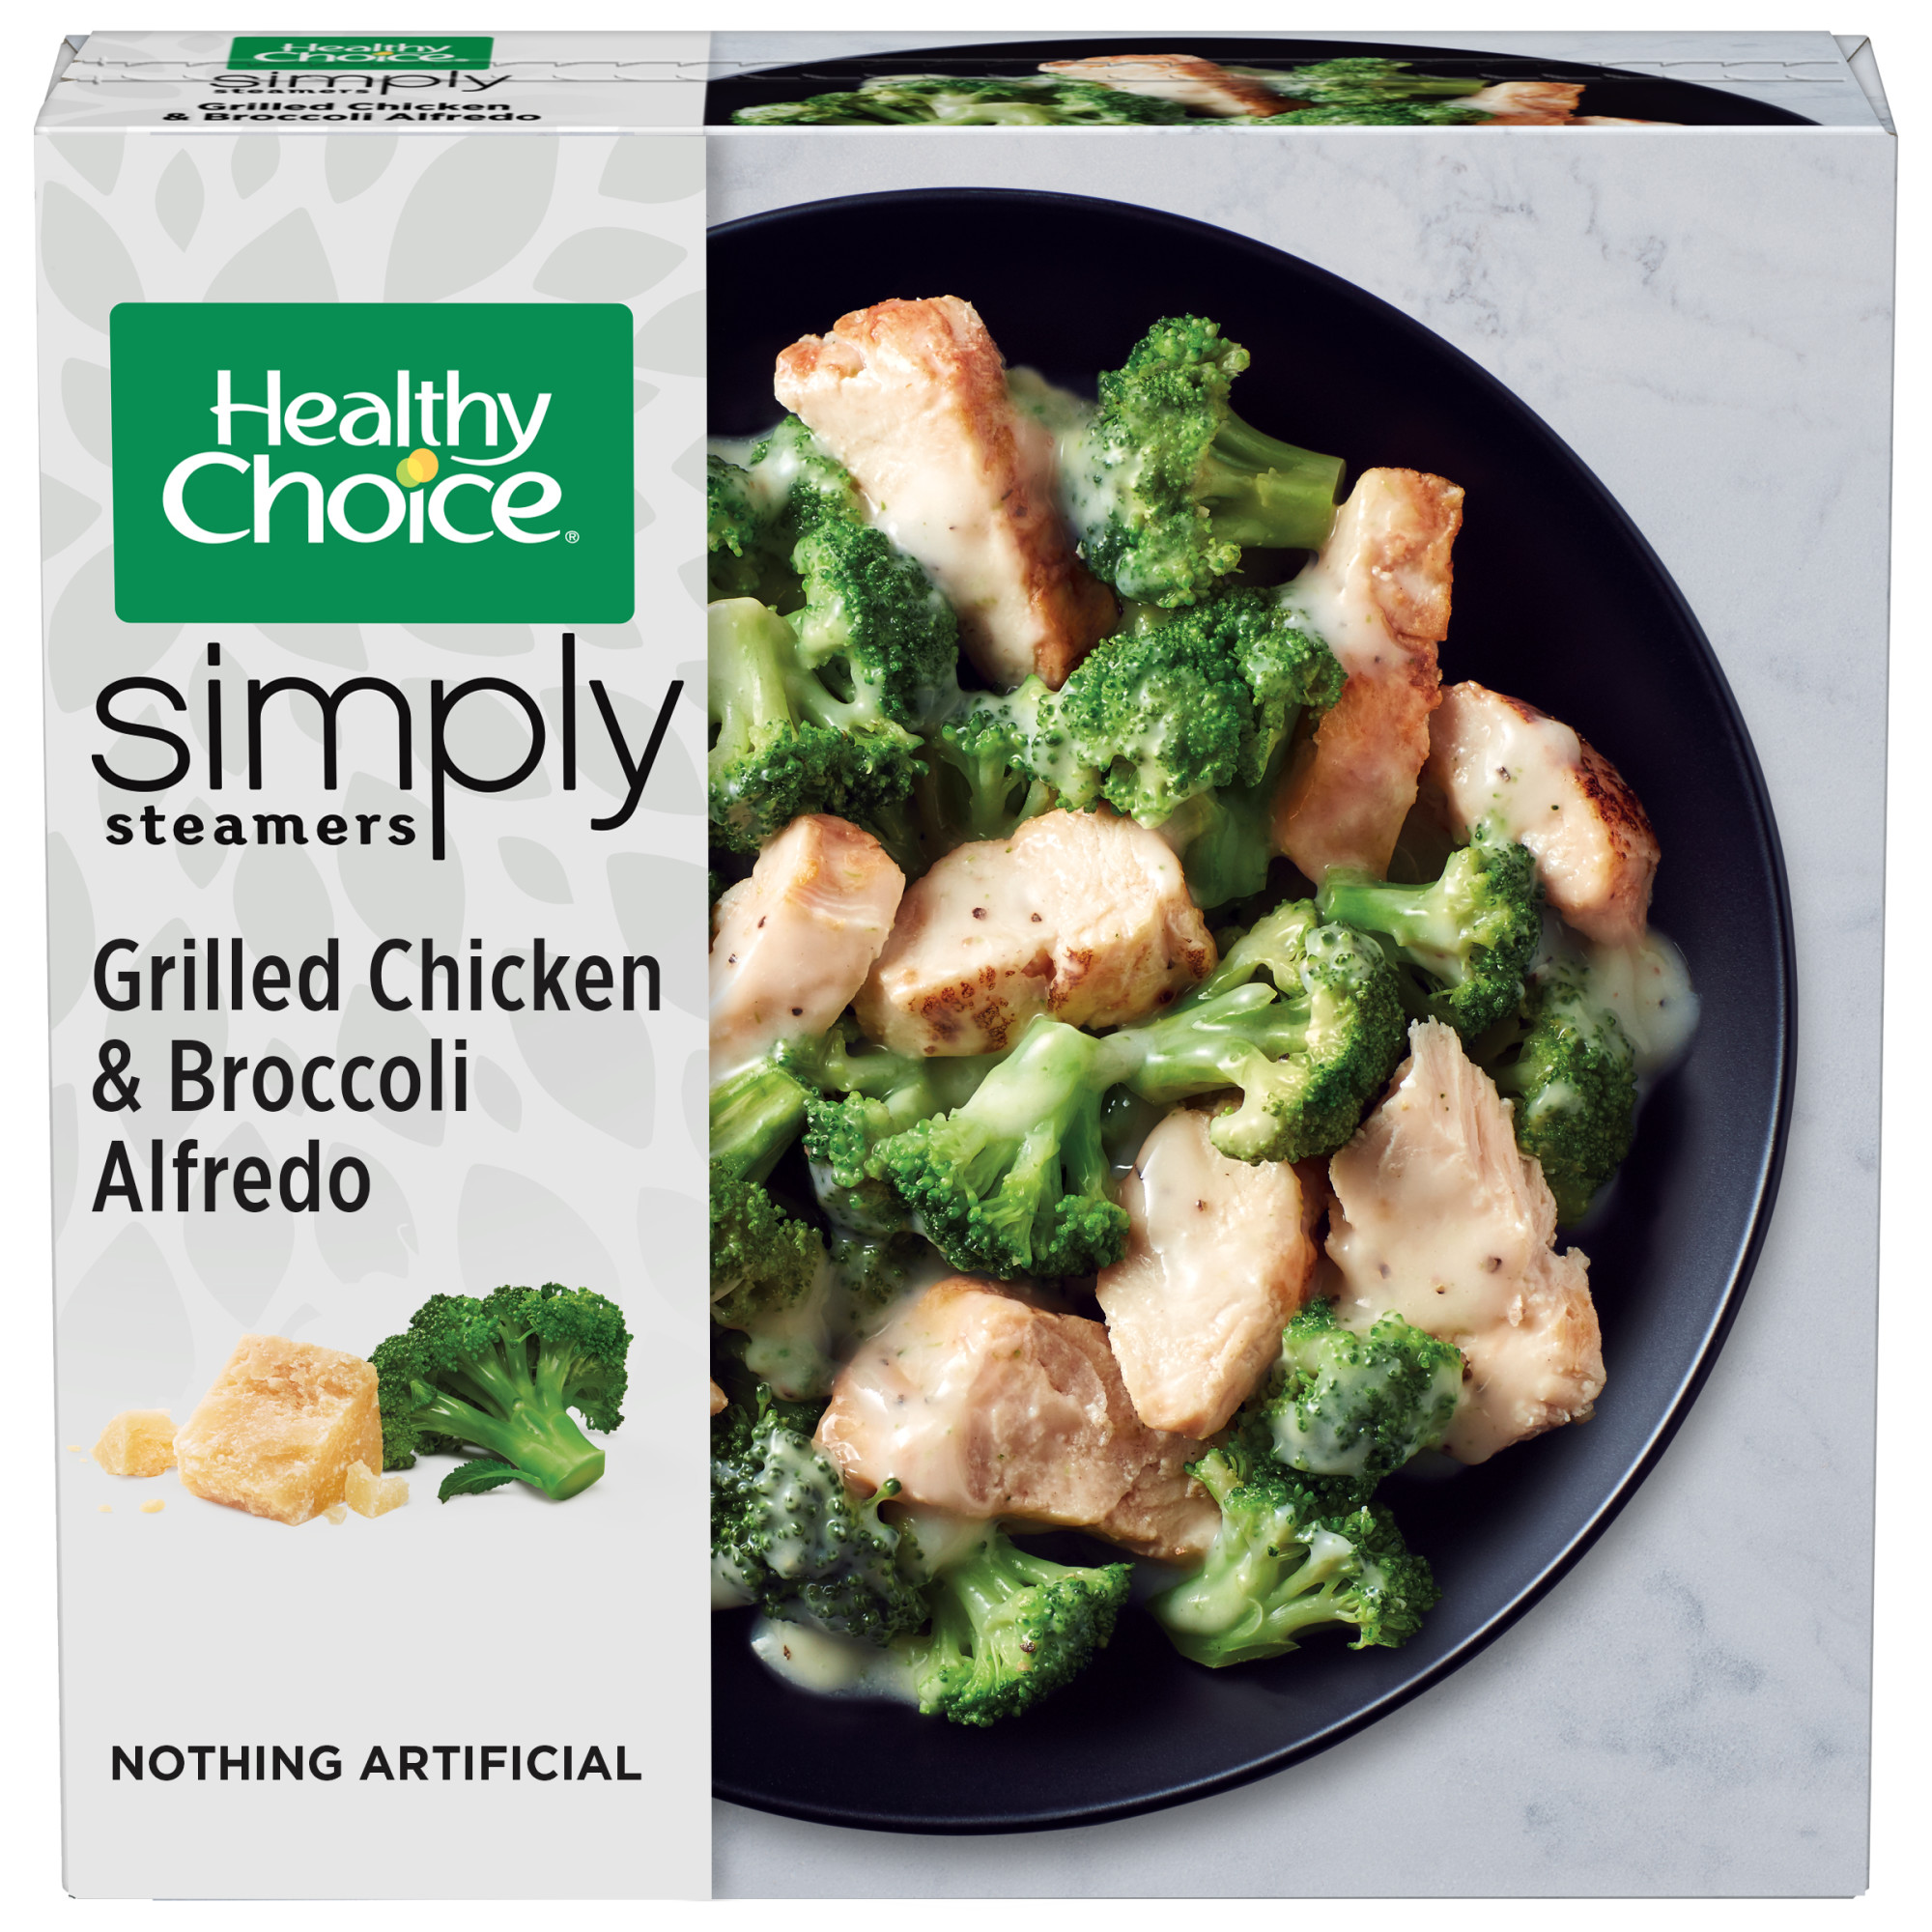 Healthy Choice Simply Steamers Grilled Chicken & Broccoli Alfredo, 9.15 oz (frozen) - image 1 of 8